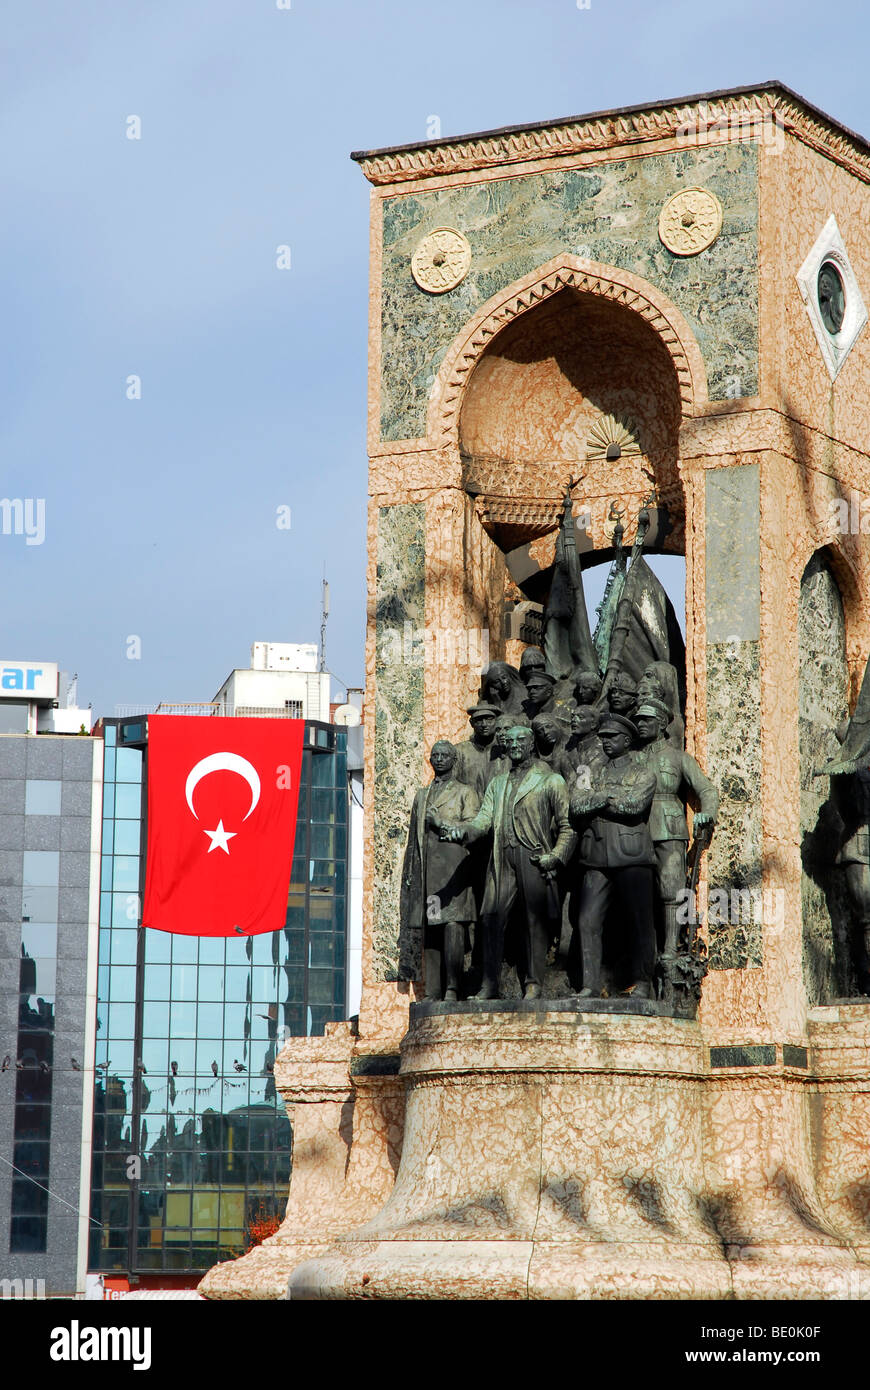 Ataturk monument and national flag at the annual festival of the Republic on October 29th, Taksim Square, Taksim Cumhuriyet Abi Stock Photo